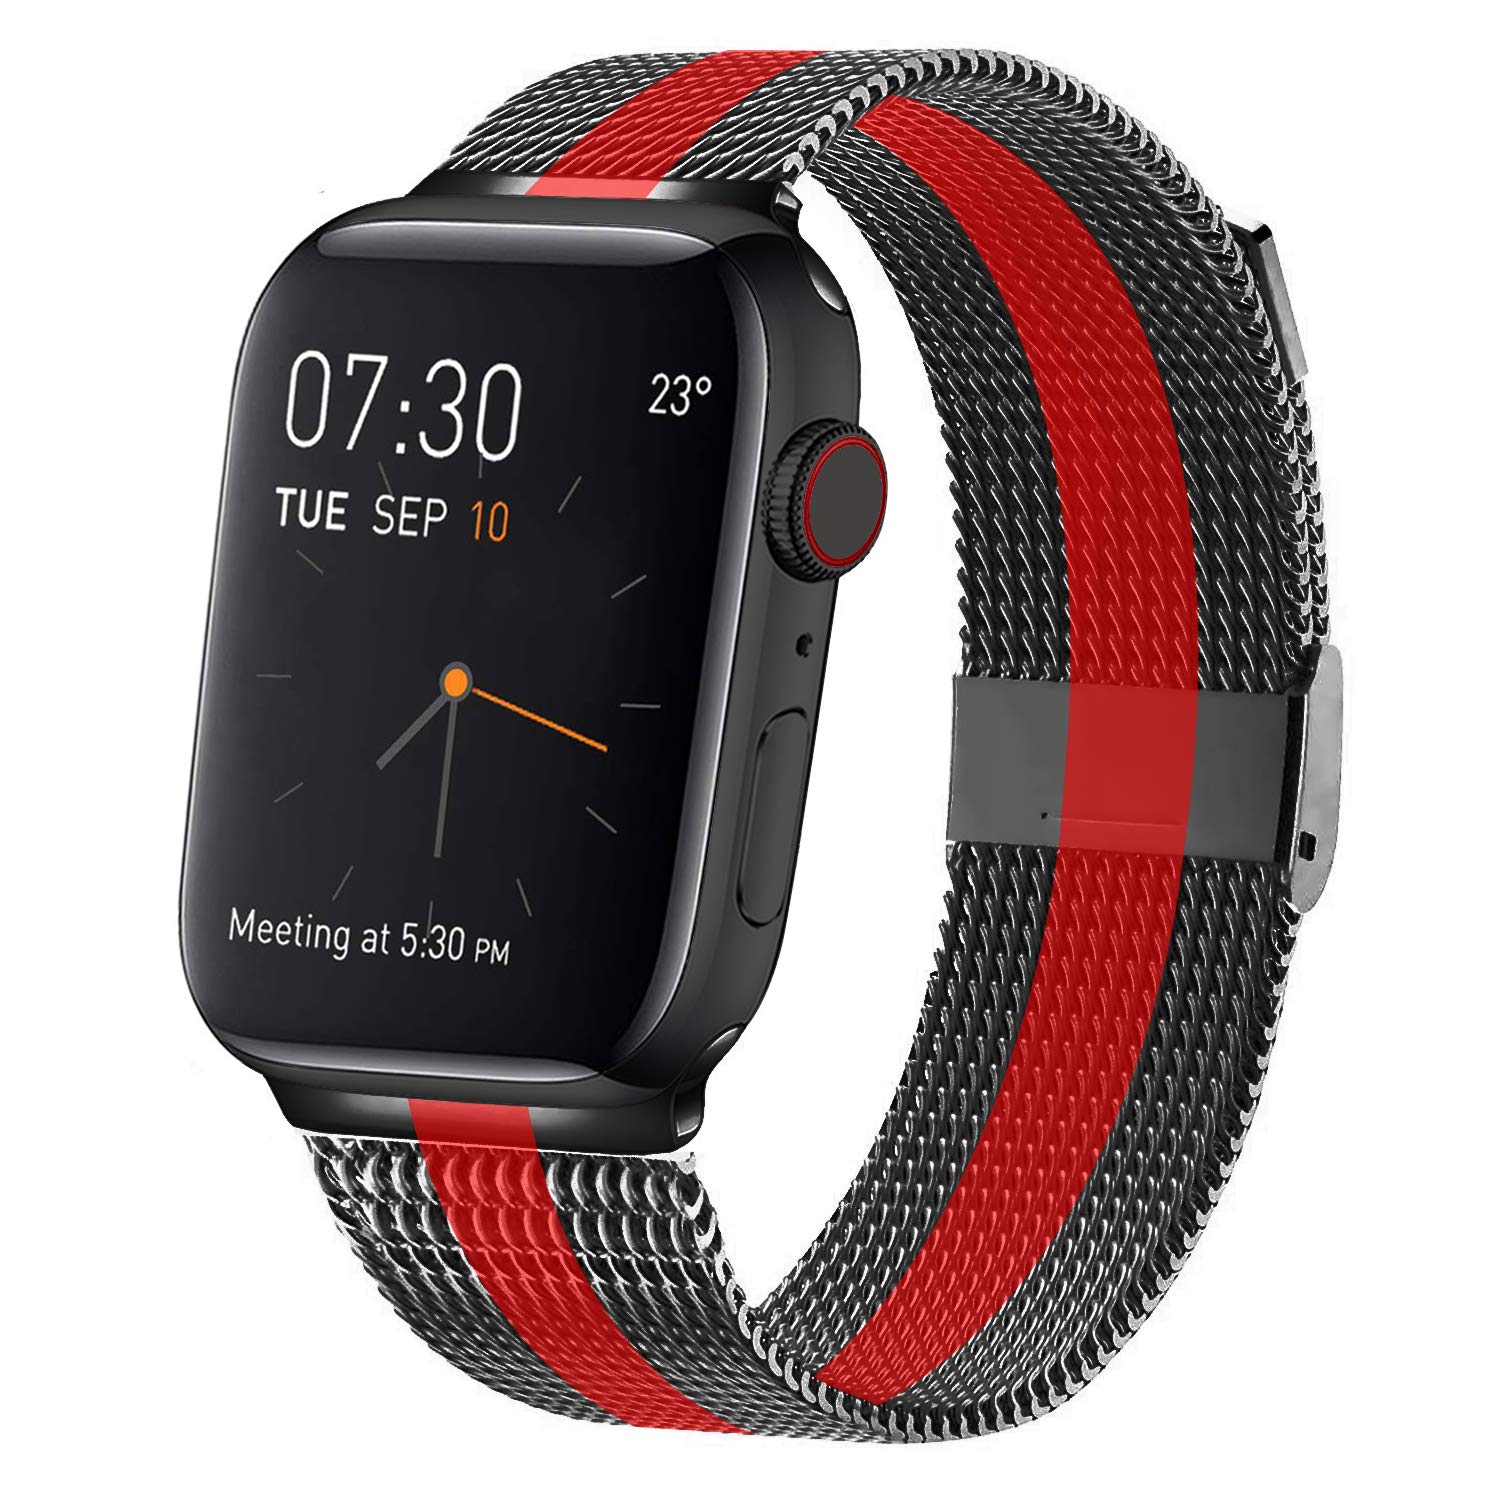 Book Cover MCORS Band Compatible with Apple Watch 38mm 40mm 42mm 44mm,Stainless Steel Mesh Metal Loop with Adjustable Replacement Bands Compatible with Iwatch Series 5 4 3 2 1 Black Red